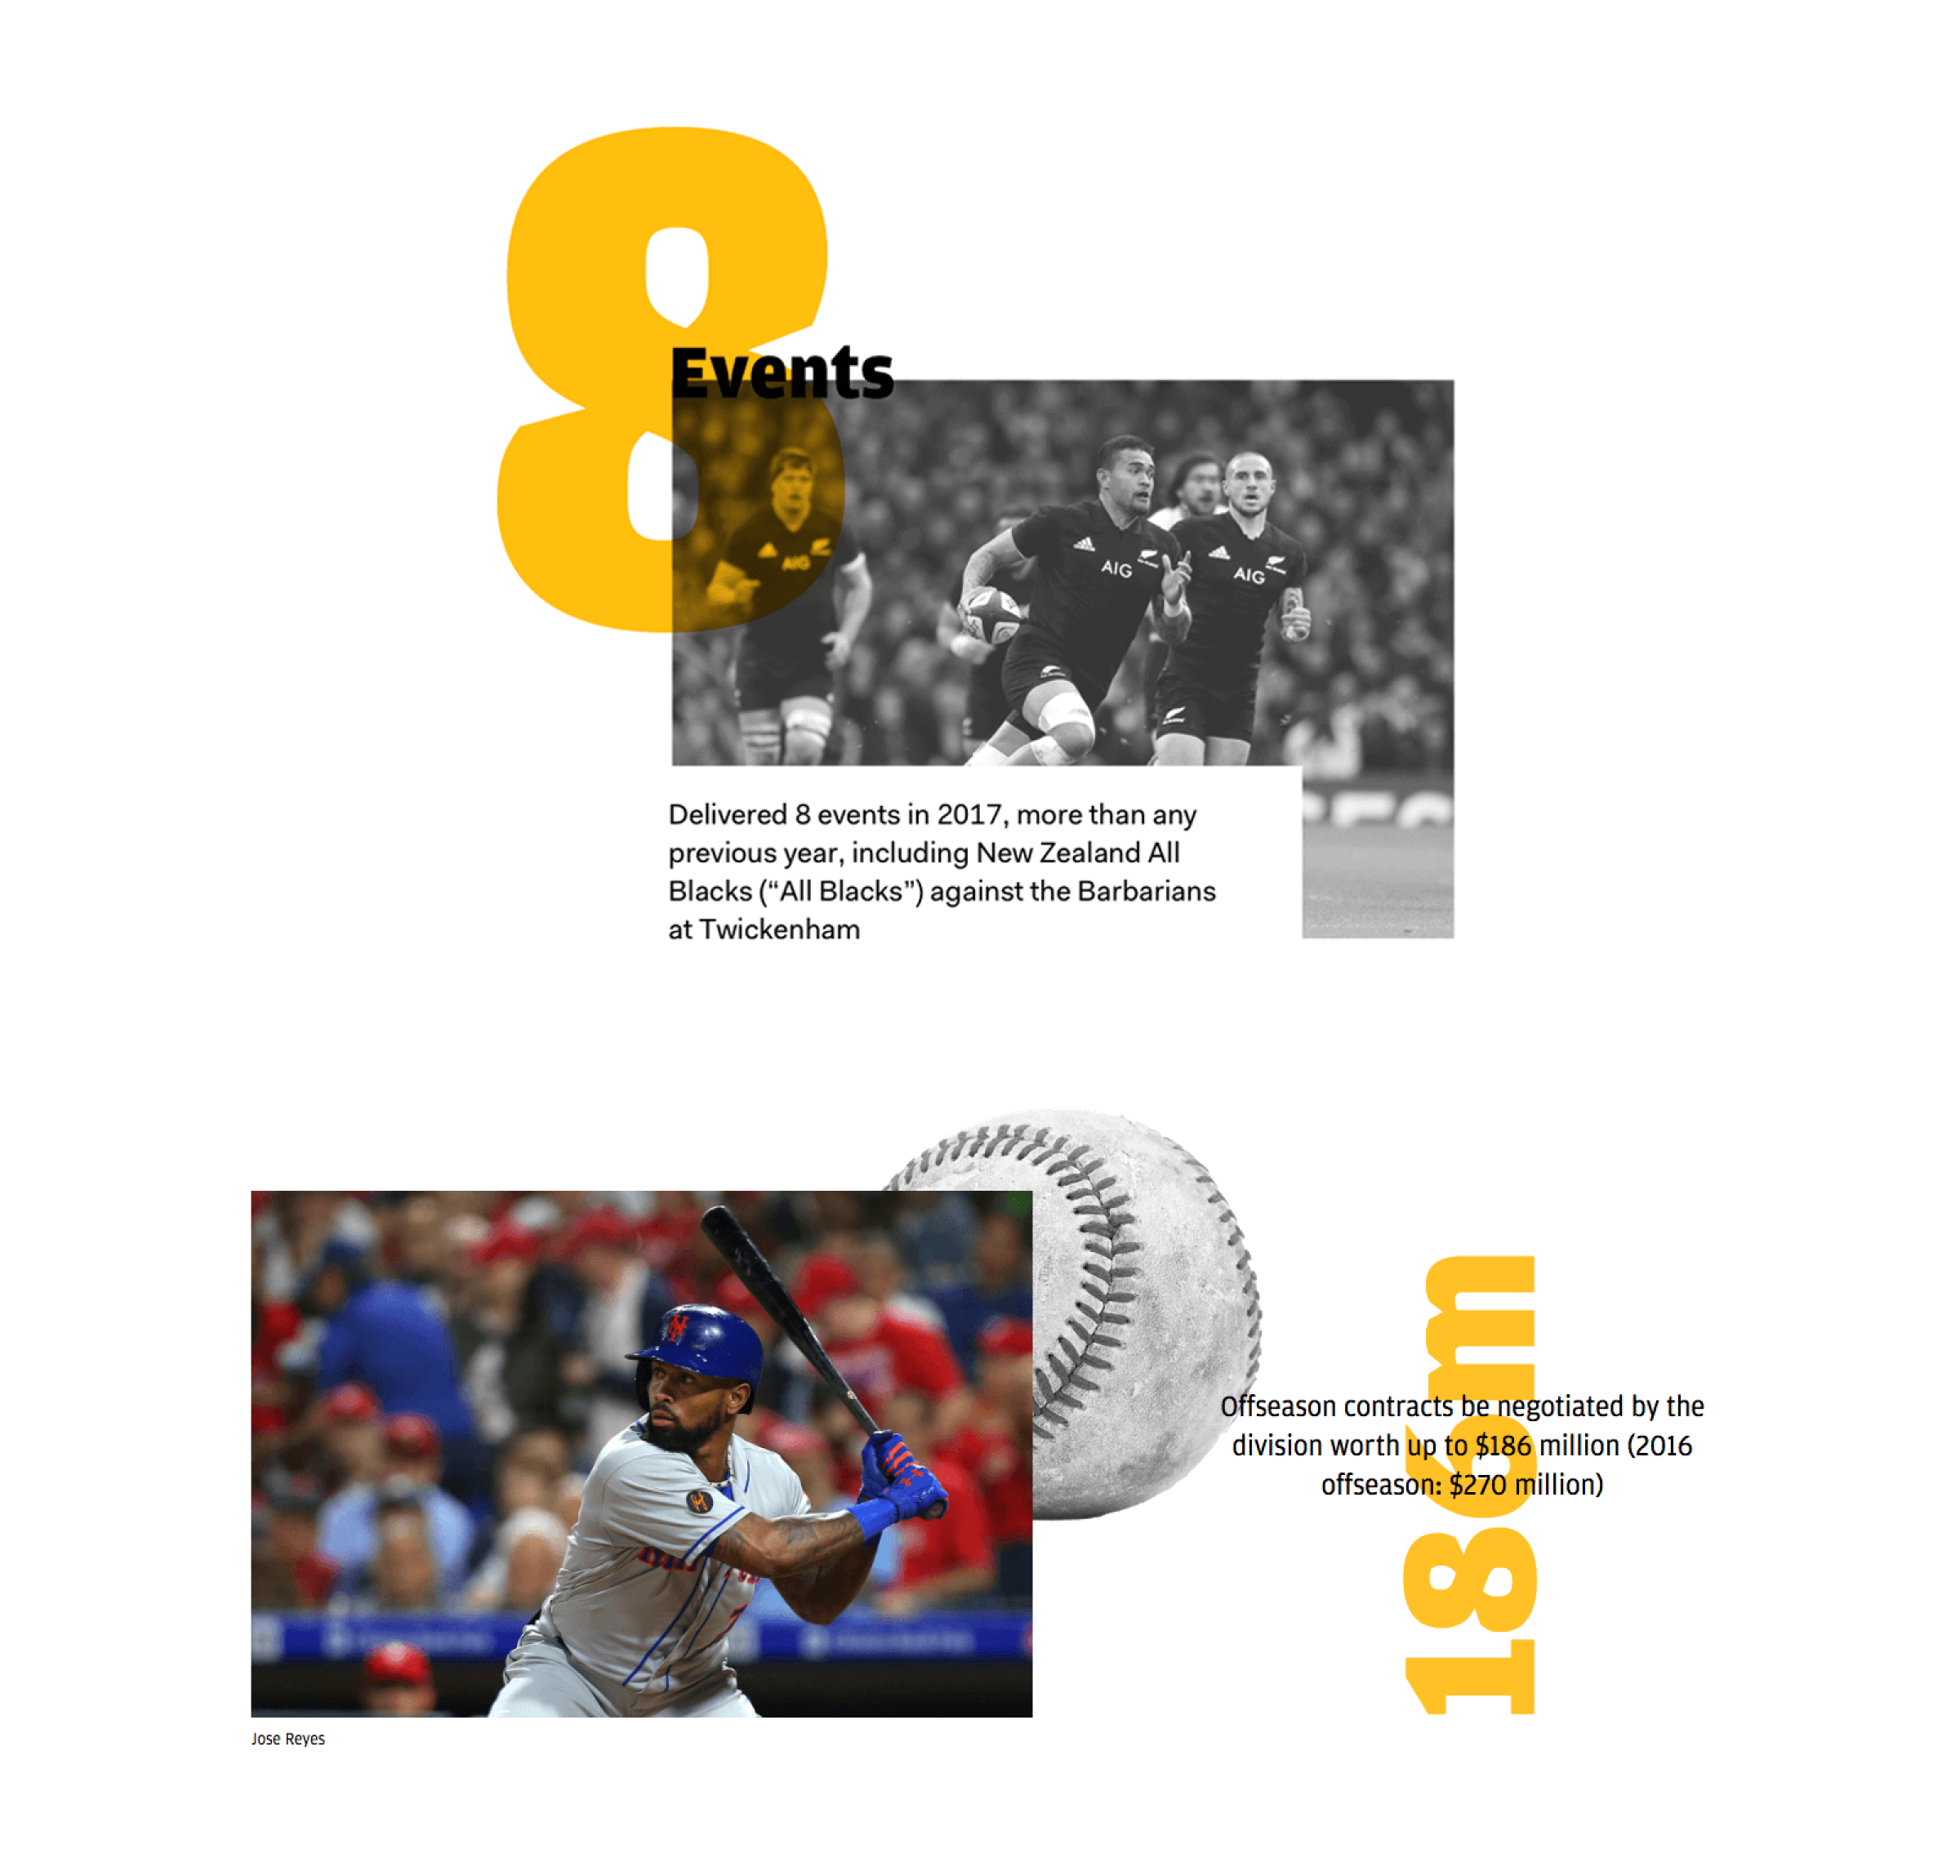 a snippet from inside the report with images of baseball and football talent interacting with facts and figures